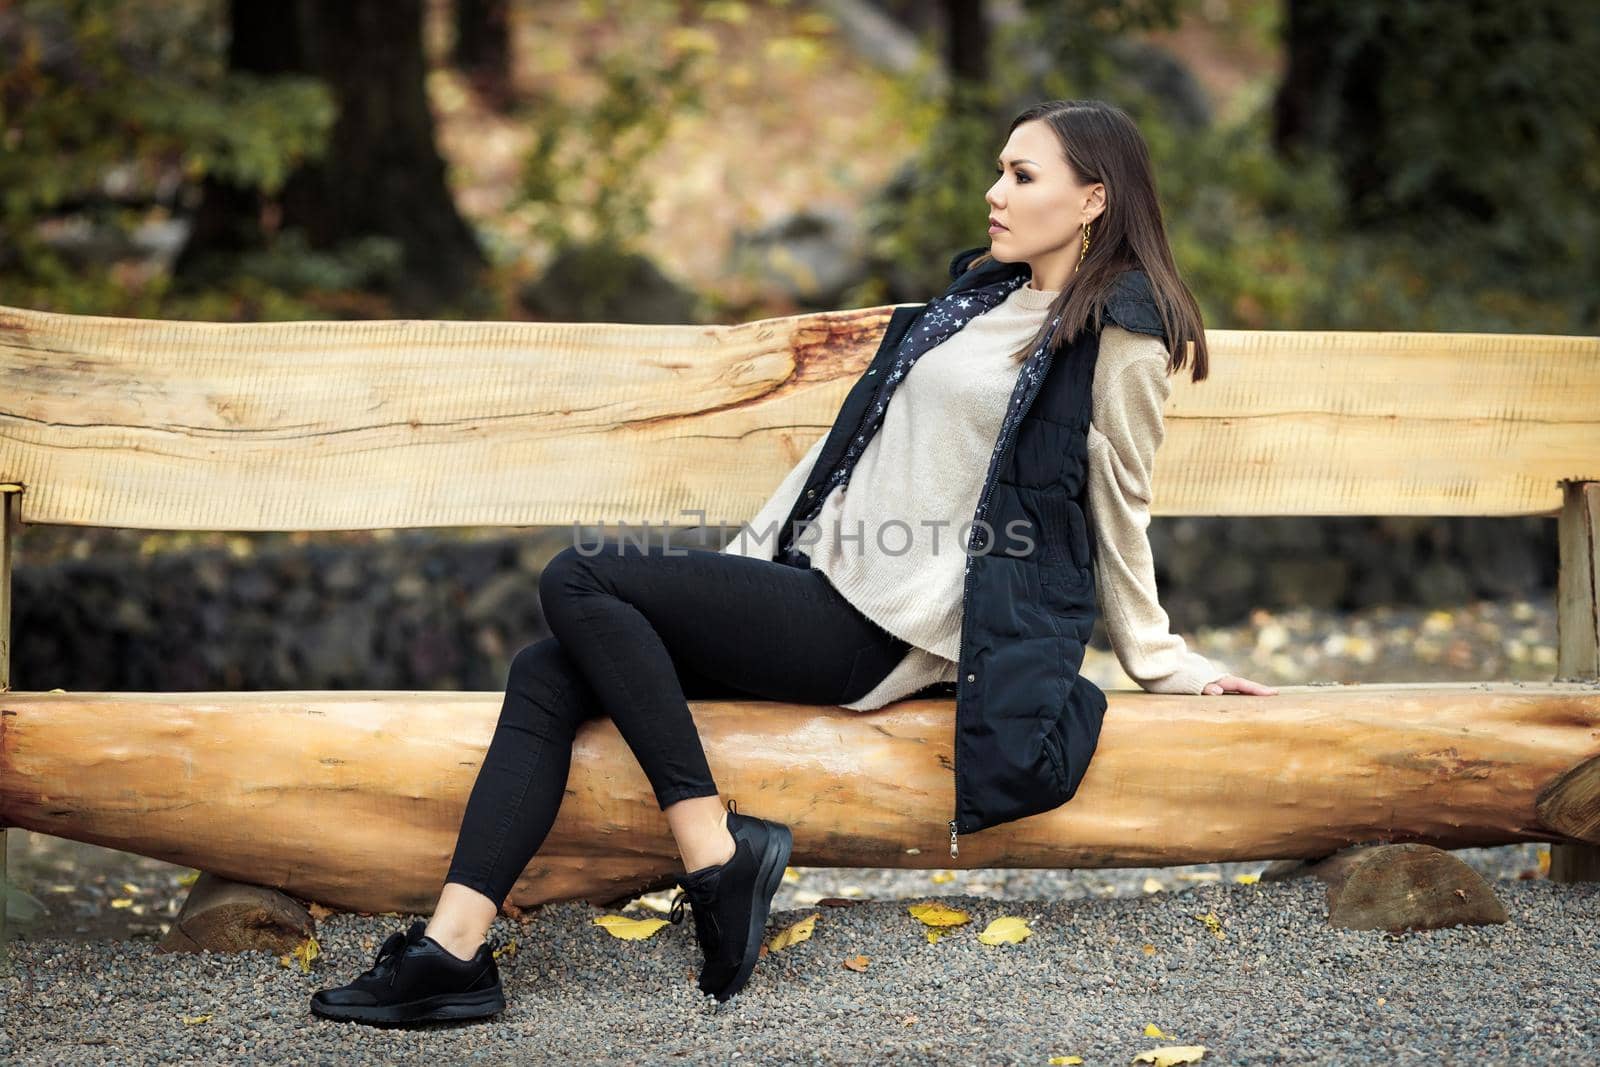 Profile of a young woman in full growth sitting on a wooden bench in a park outdoors. High quality photo